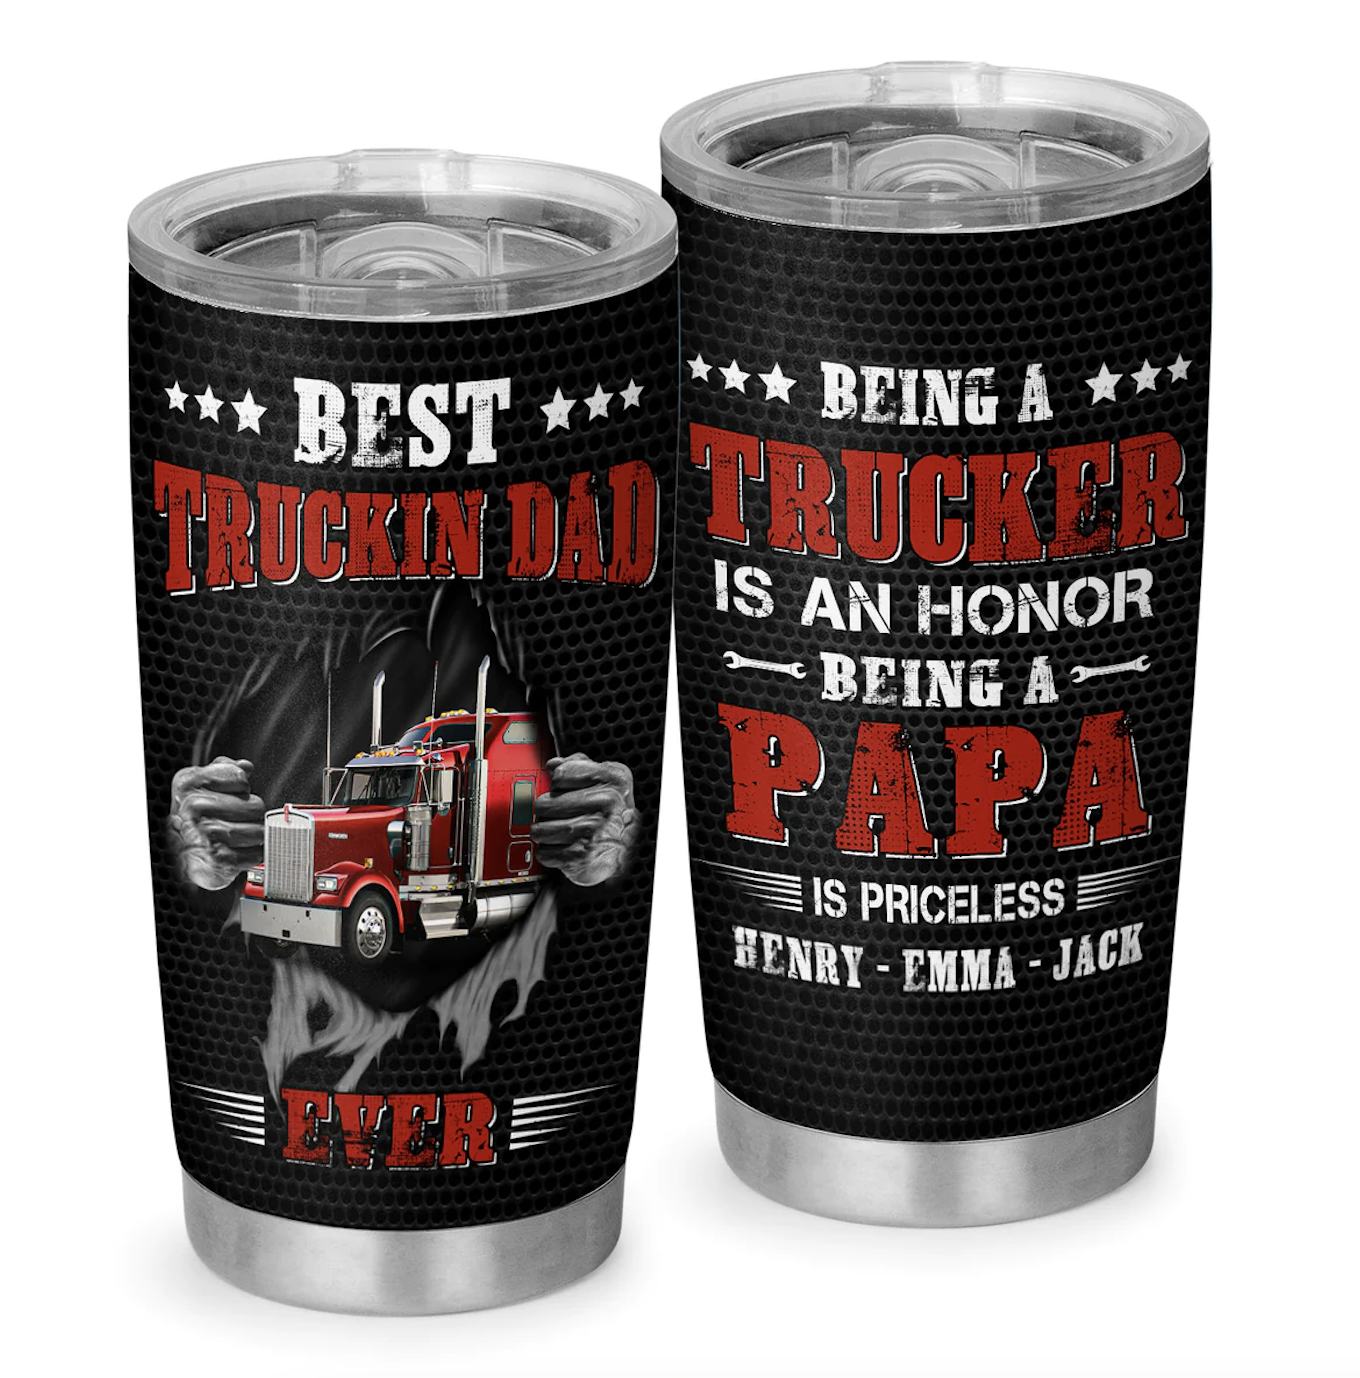 The Top 10 Gift Ideas for Truckers (Truck Driver Approved)